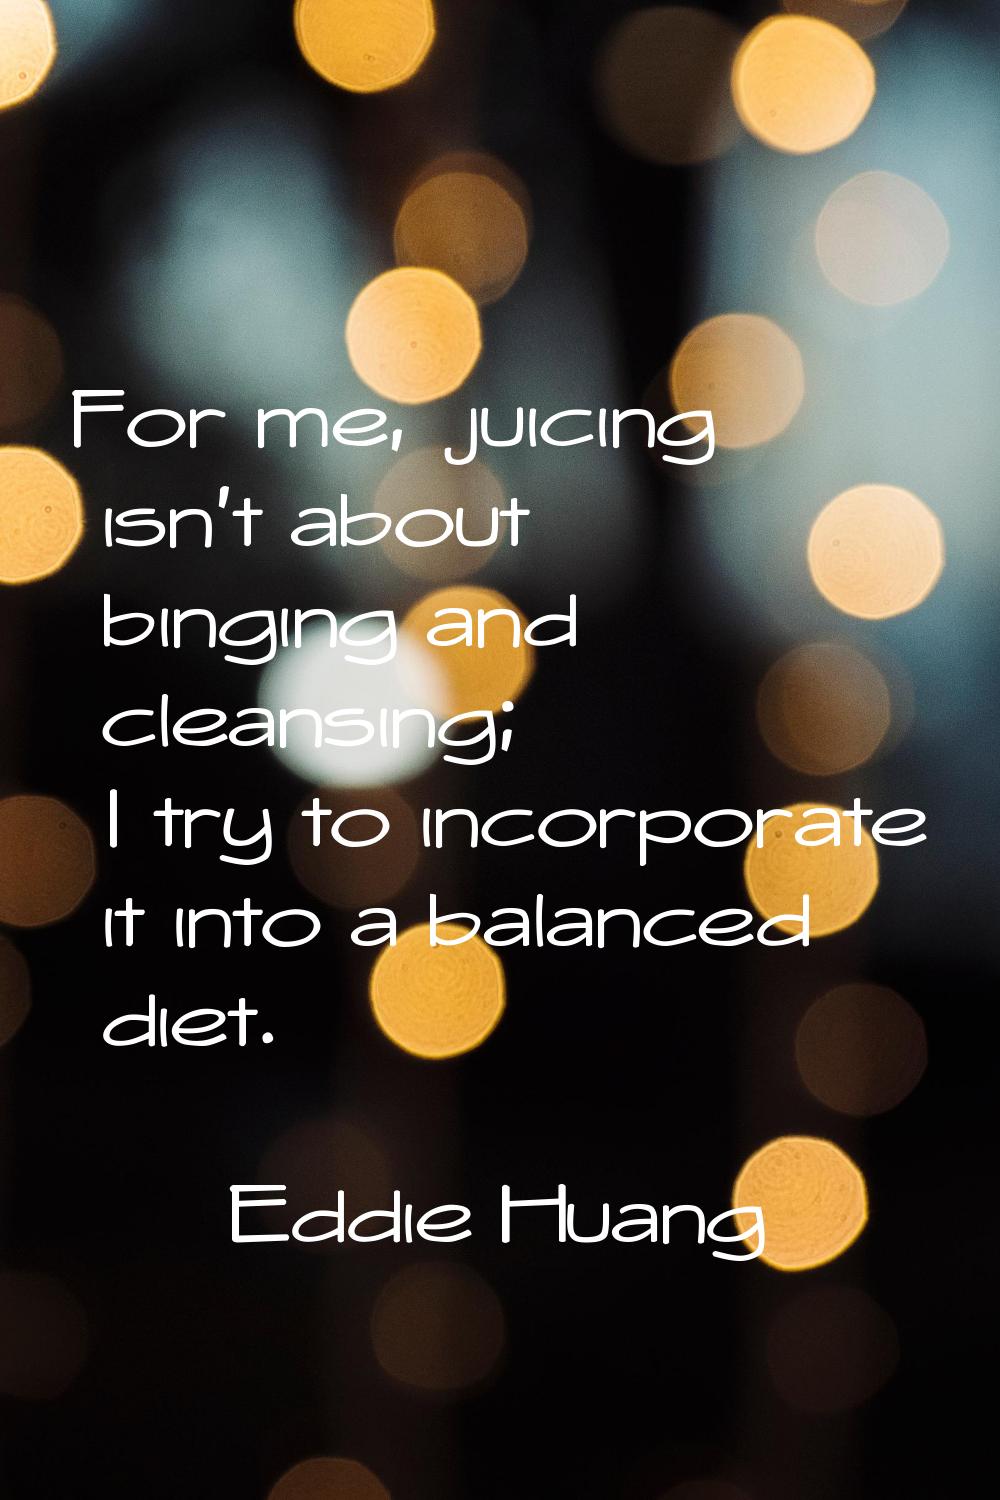 For me, juicing isn't about binging and cleansing; I try to incorporate it into a balanced diet.